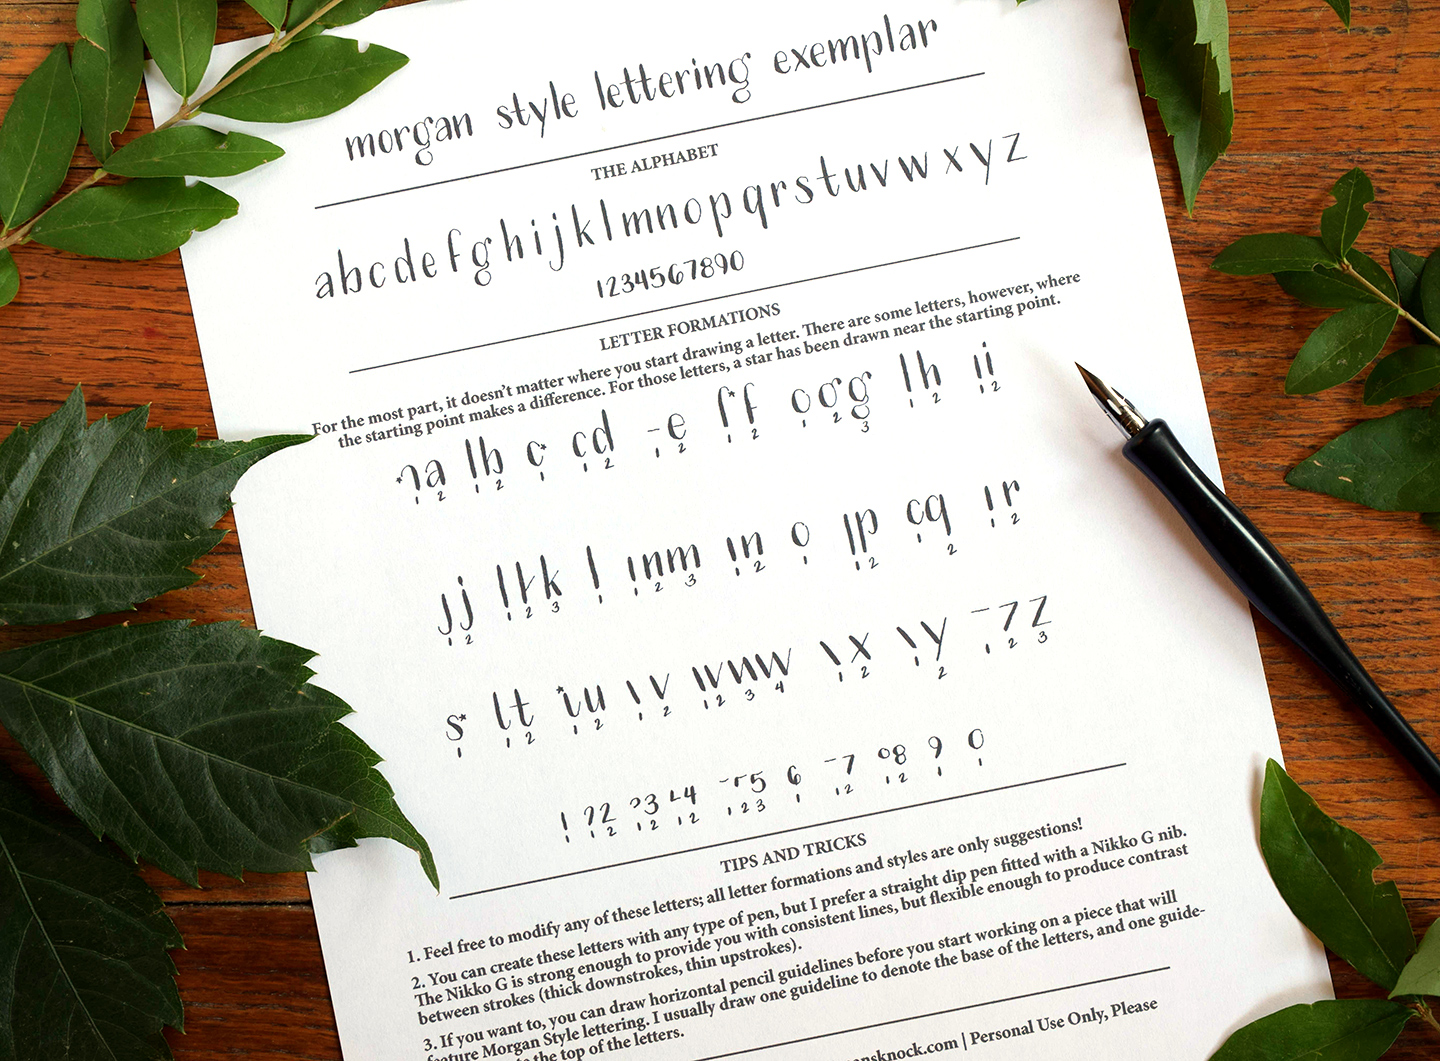 Free Printable Hand Lettering Exemplar: “Morgan Style”